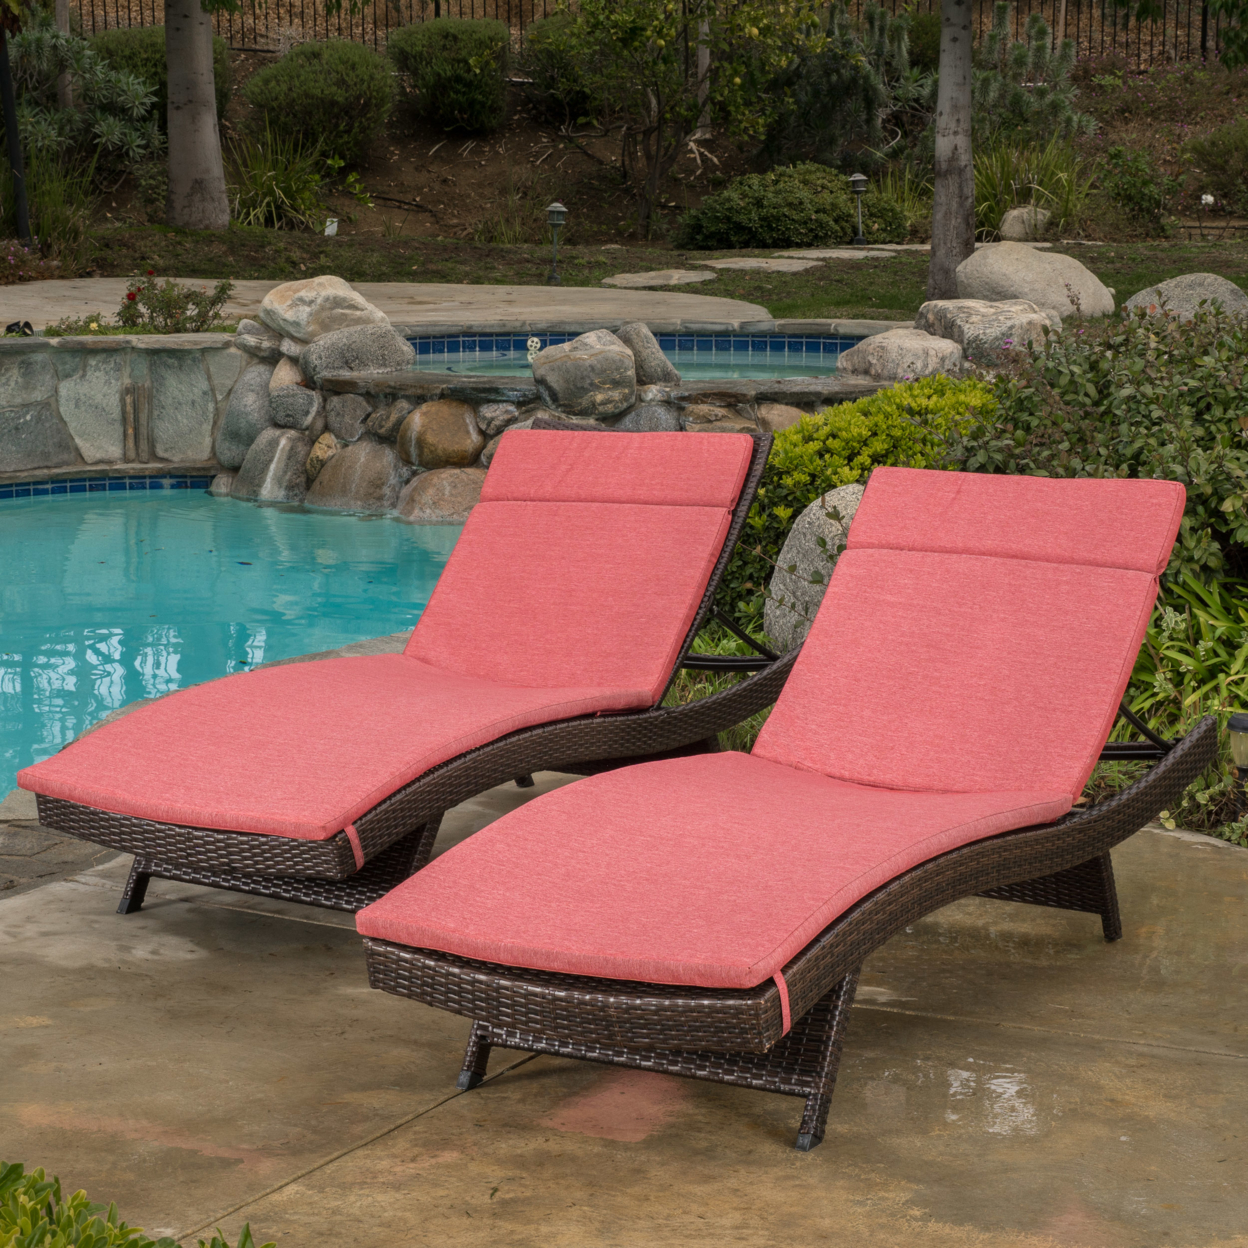 Buy Lakeport Outdoor Adjustable Chaise Lounge Chairs with Cushions (set